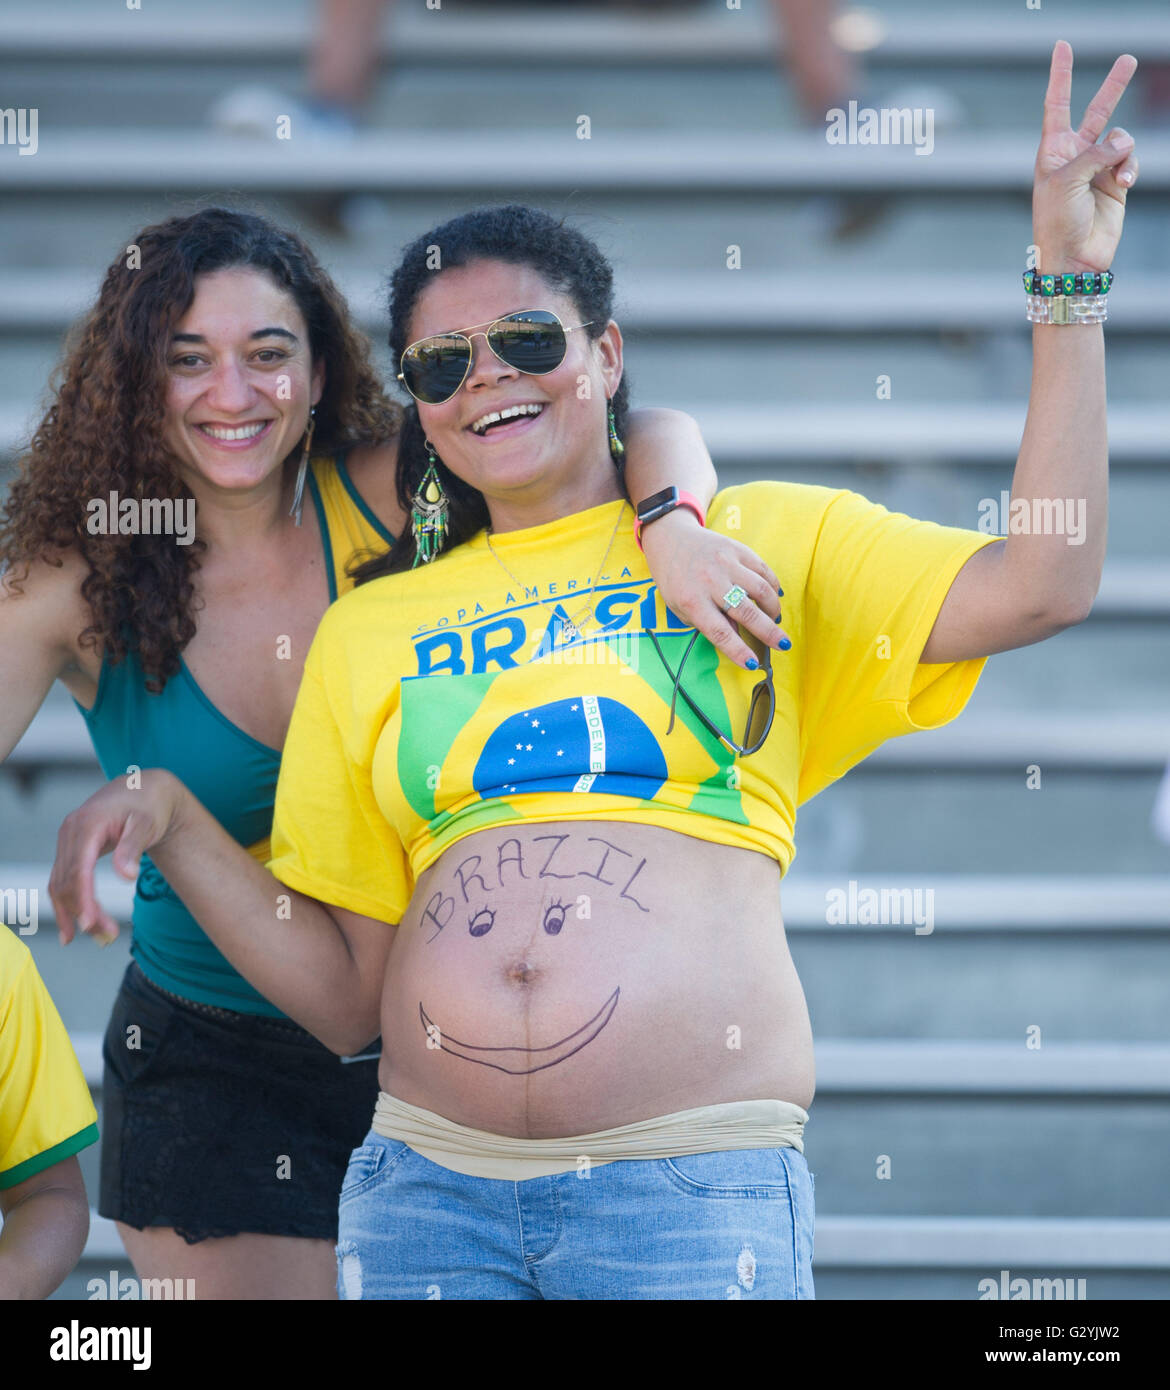 Pasadena, USA. 4th June, 2016. Supporters of Brazil cheer the team ahead of the 2016 Copa America Centenario Group B match against Ecuador in Pasadena, the United States, June 4, 2016. The match ended with a 0-0 draw. © Yang Lei/Xinhua/Alamy Live News Stock Photo